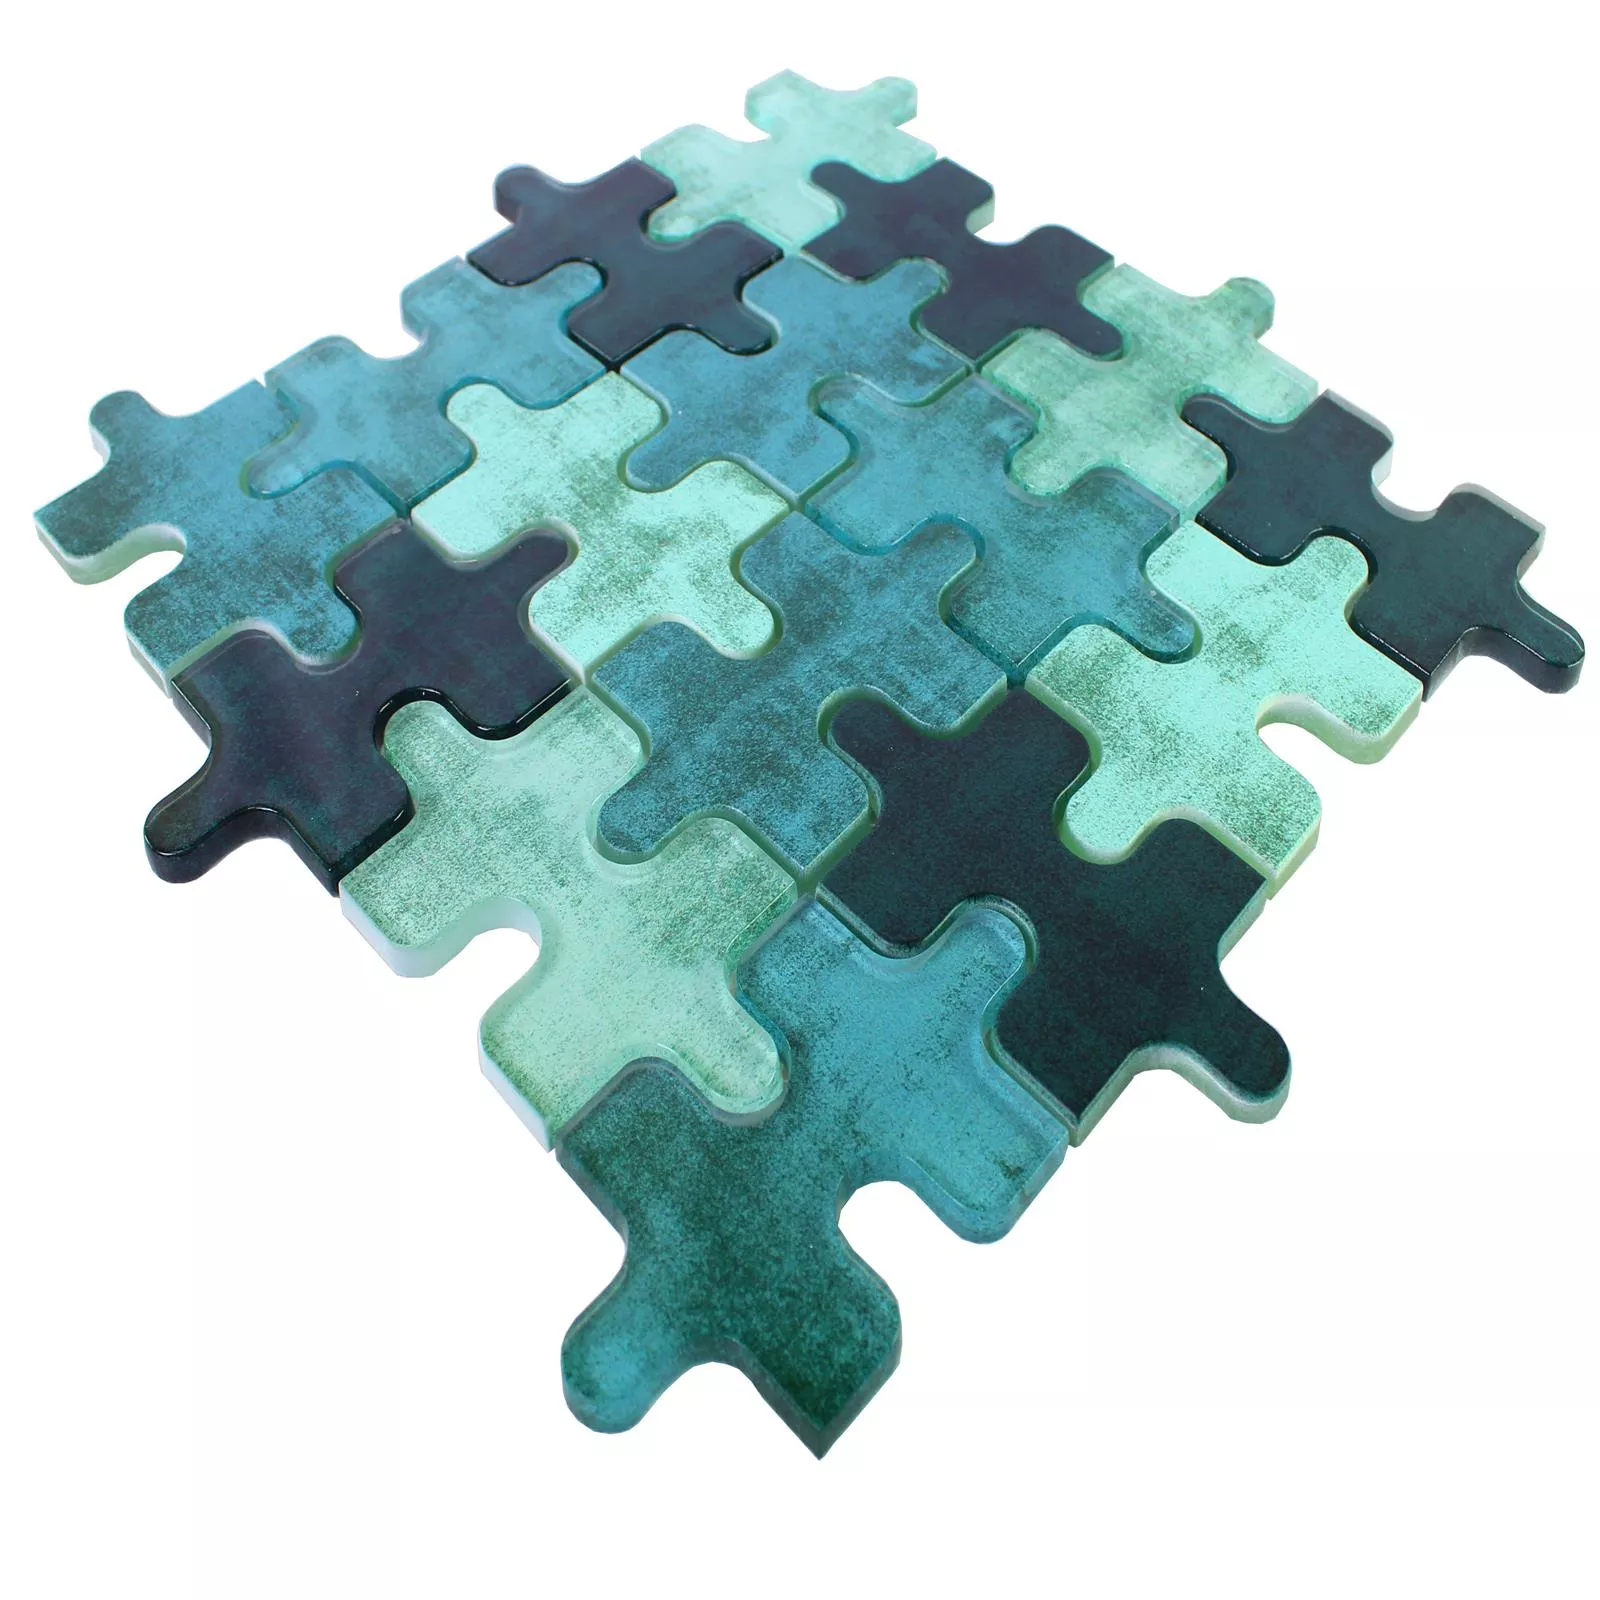 Sample Glass Mosaic Tiles Puzzle Green